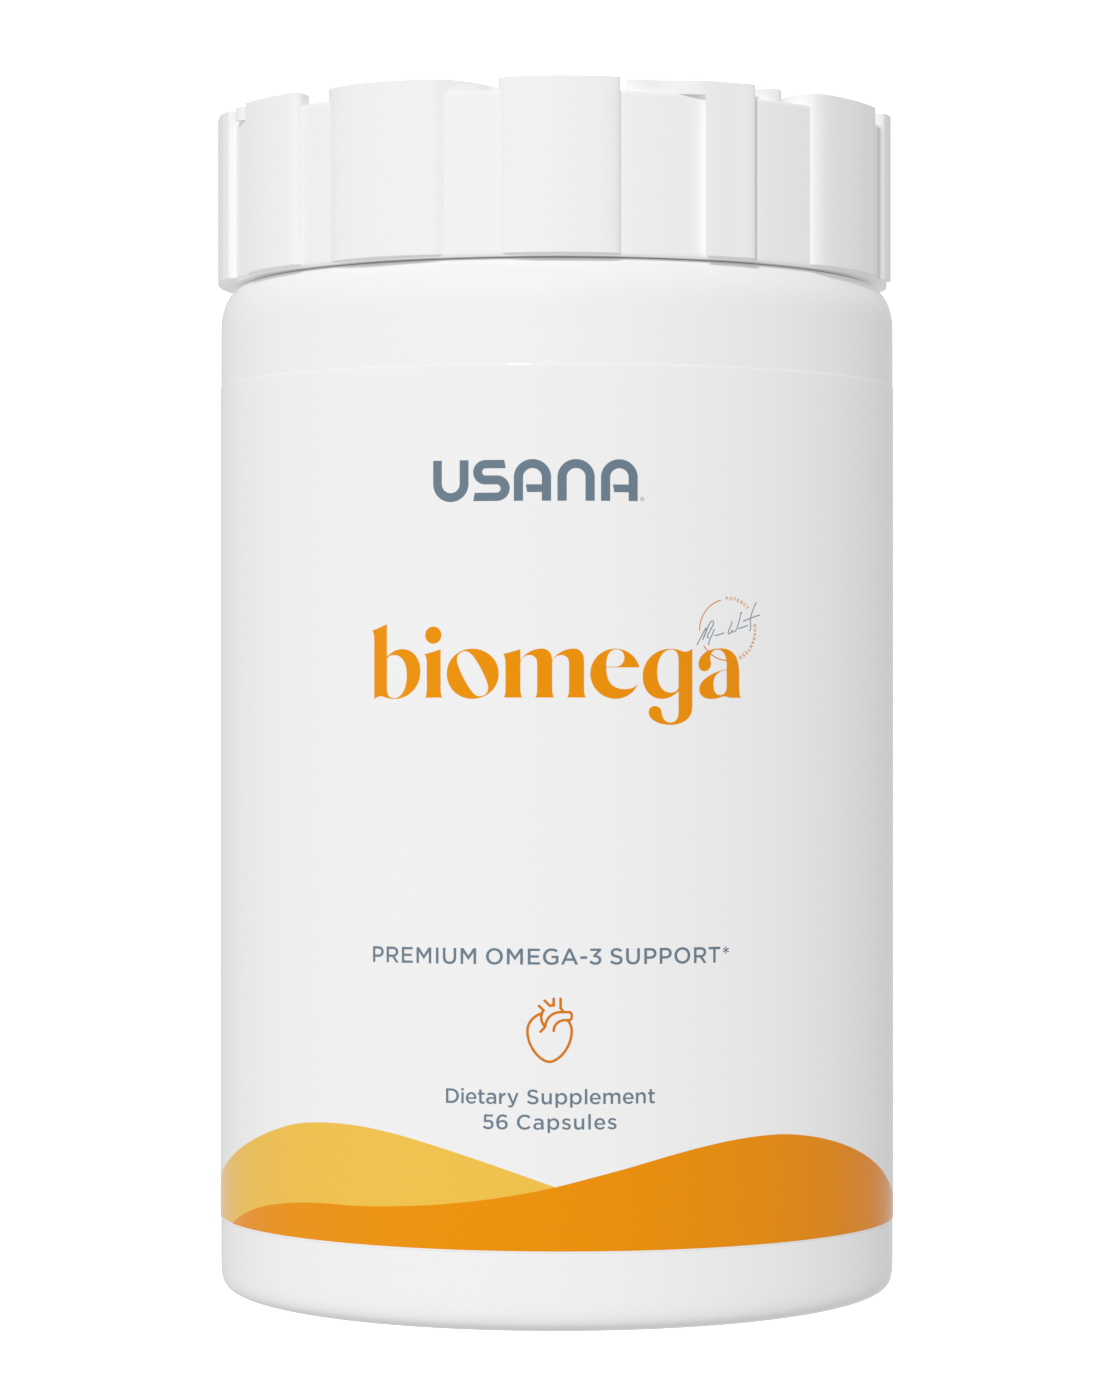 Pure Omega3 Supplement